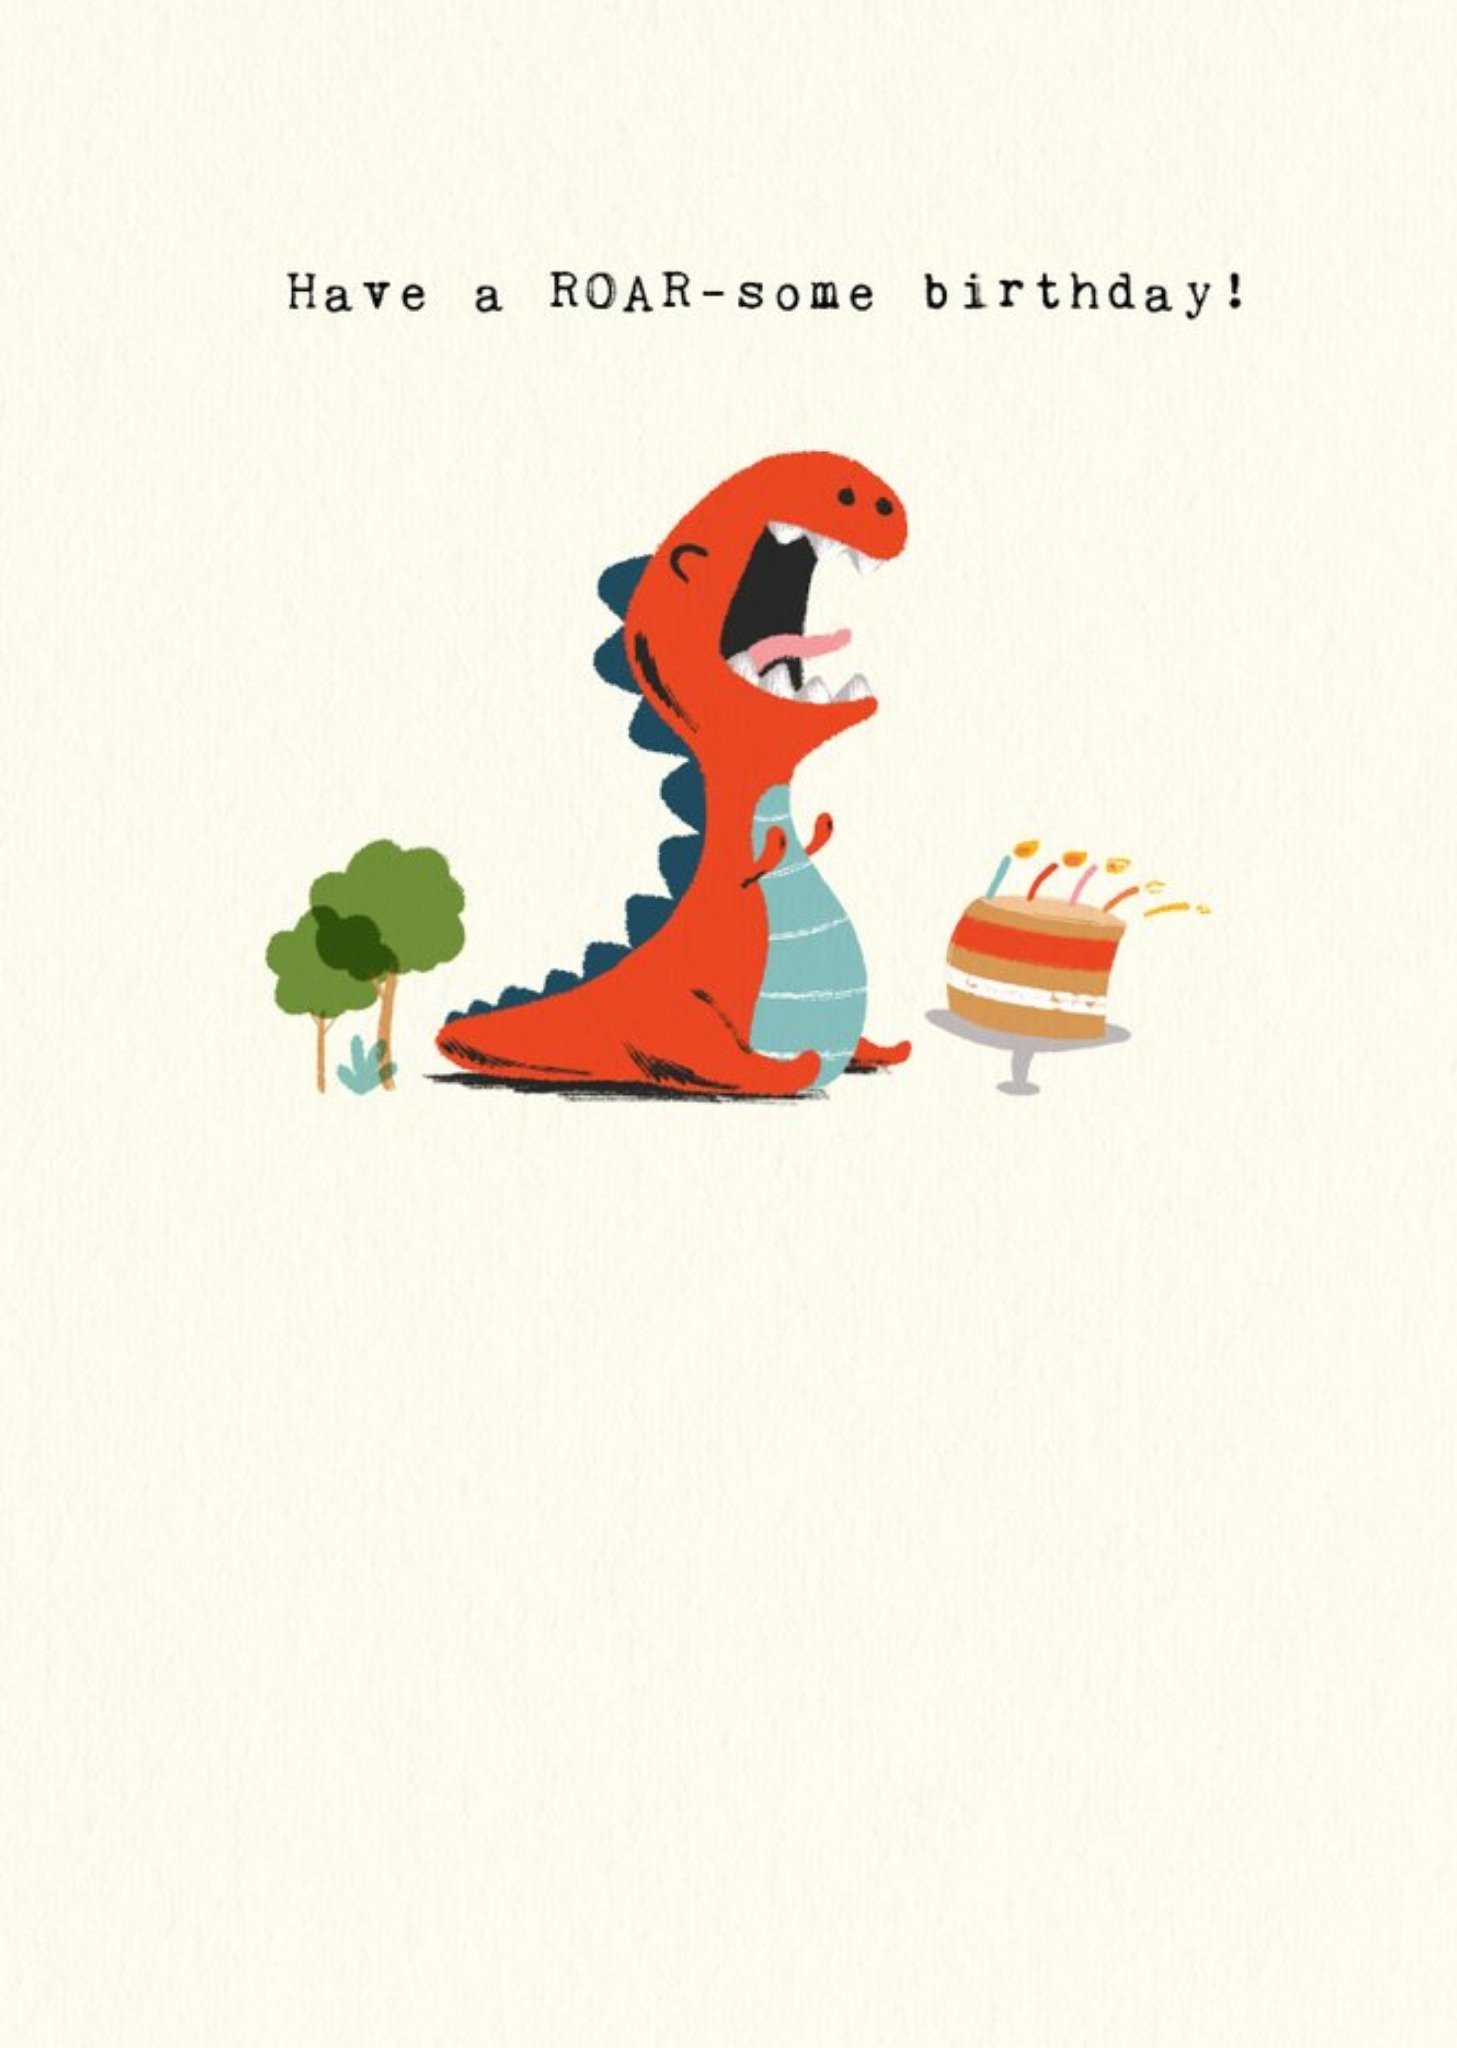 Moonpig Dinosaur And Cake Have A Roar-Some Birthday Card, Large